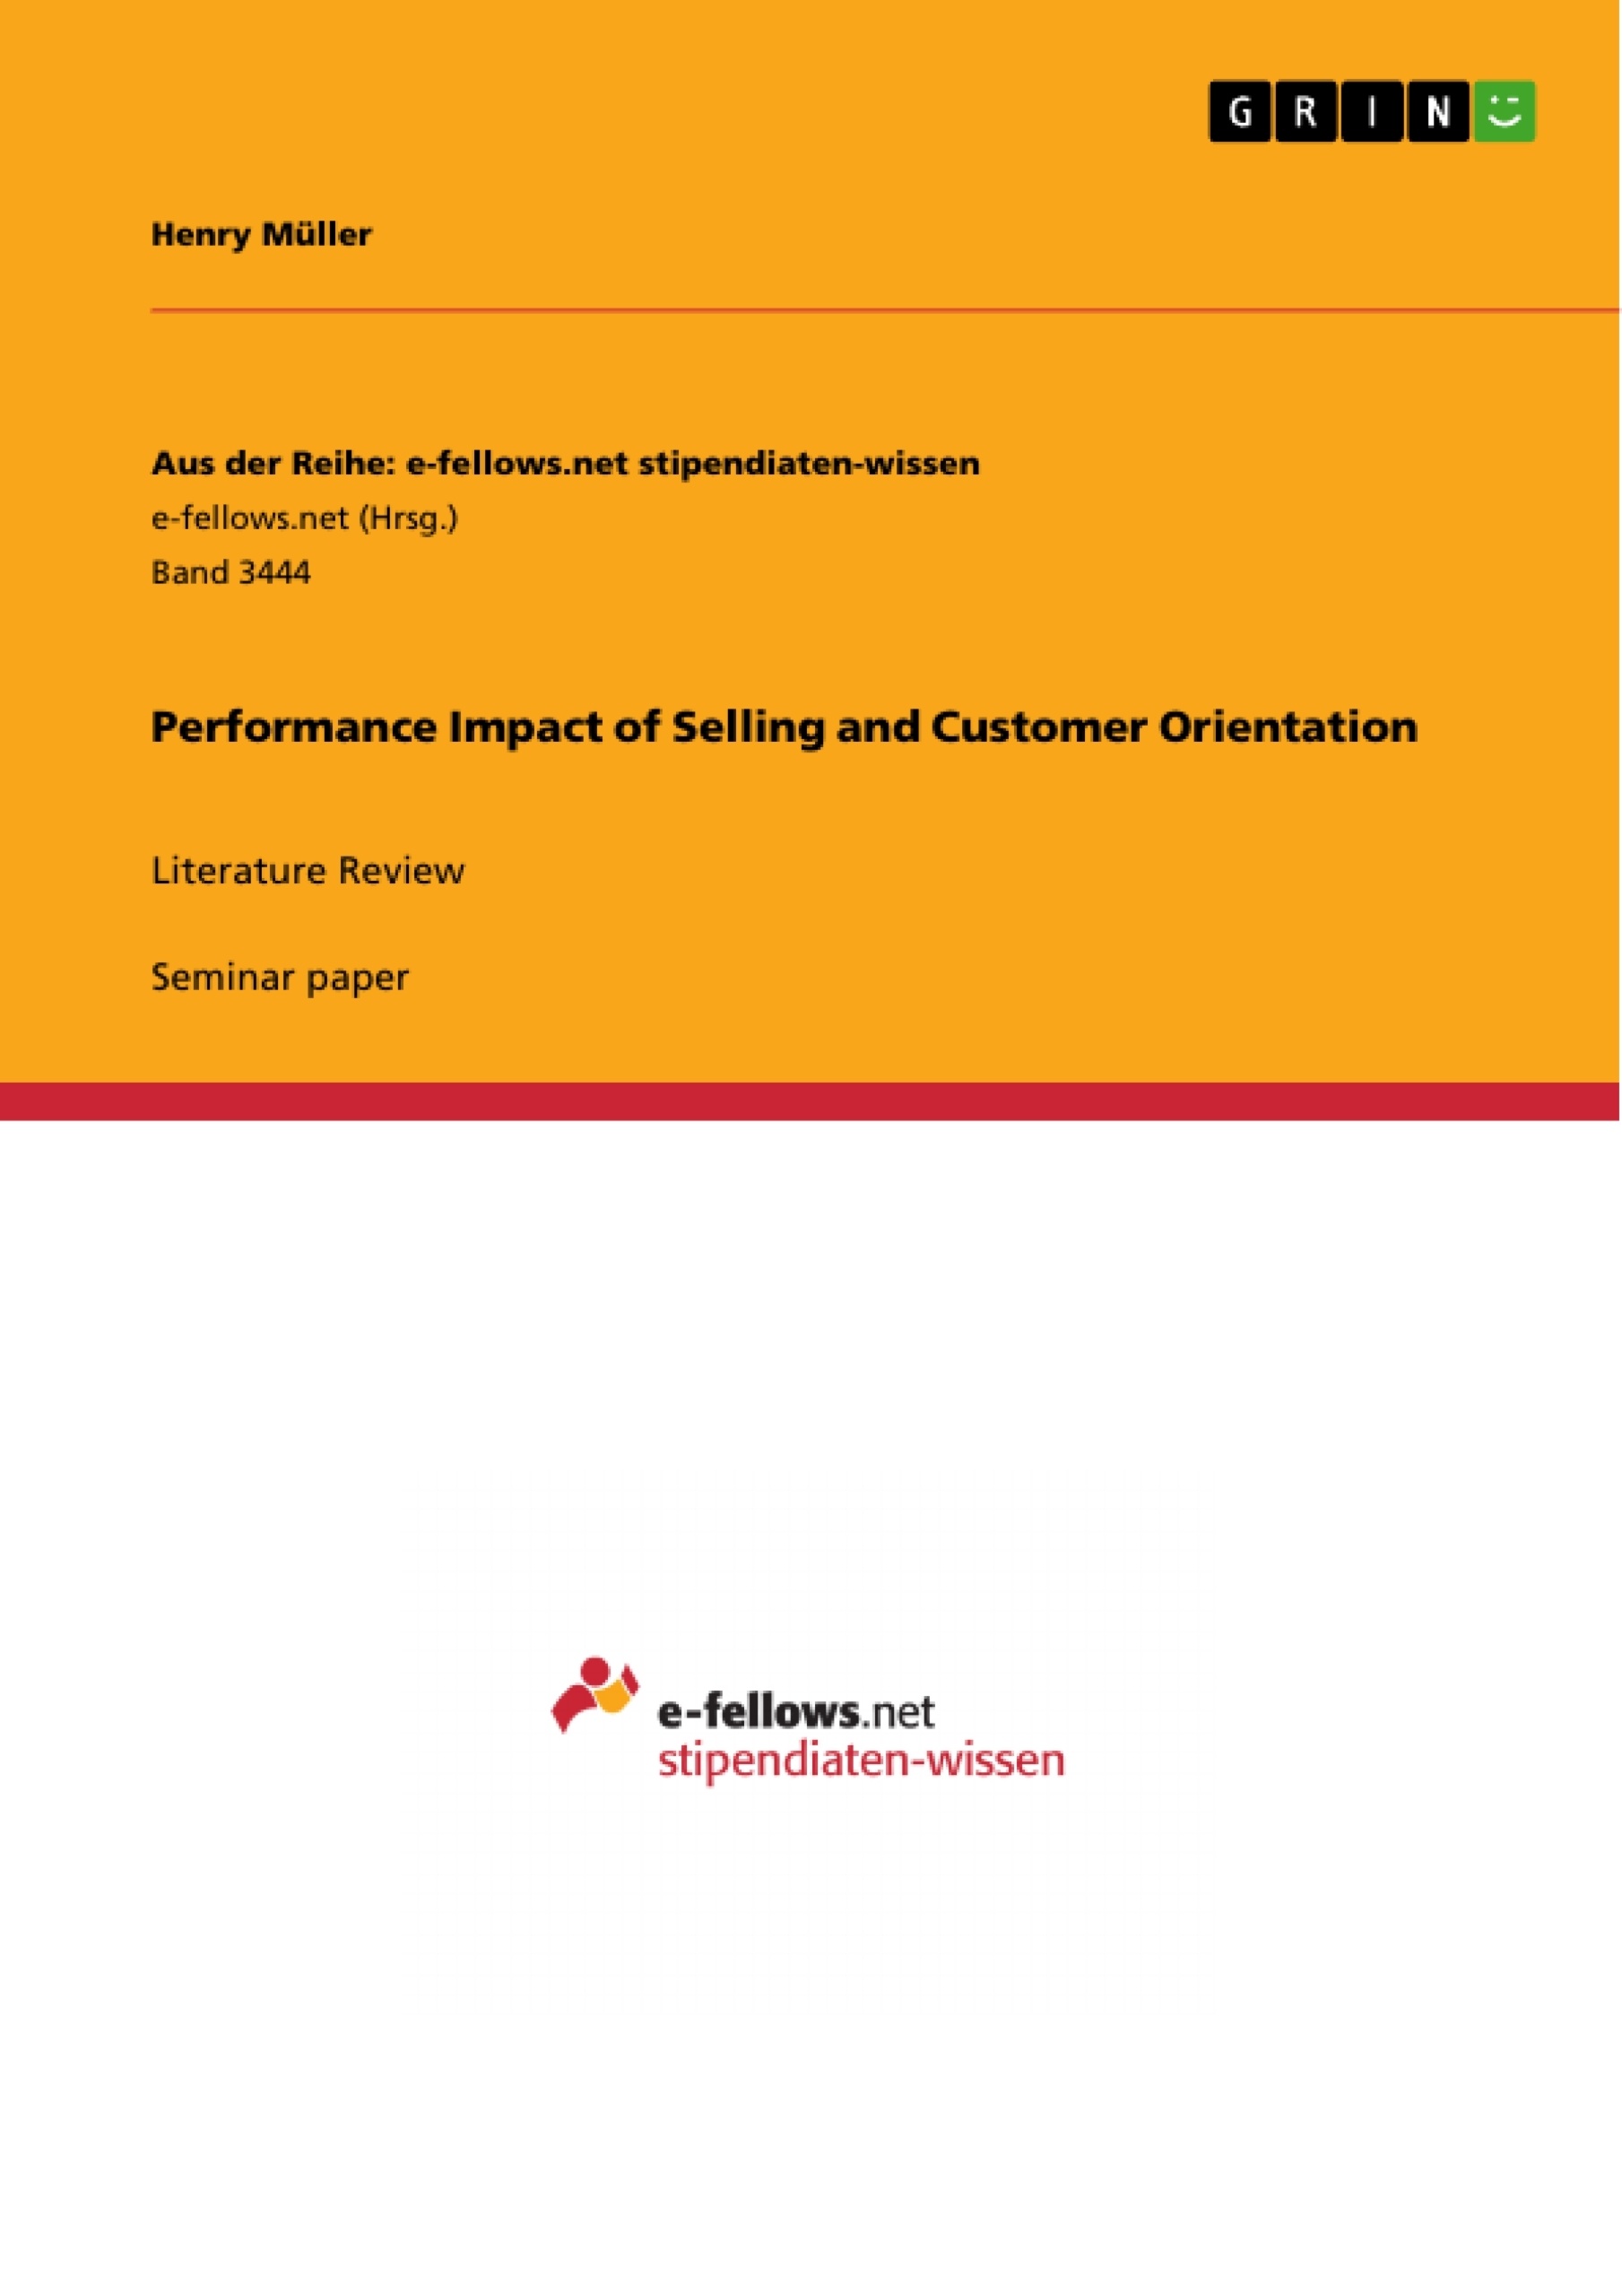 Title: Performance Impact of Selling and Customer Orientation